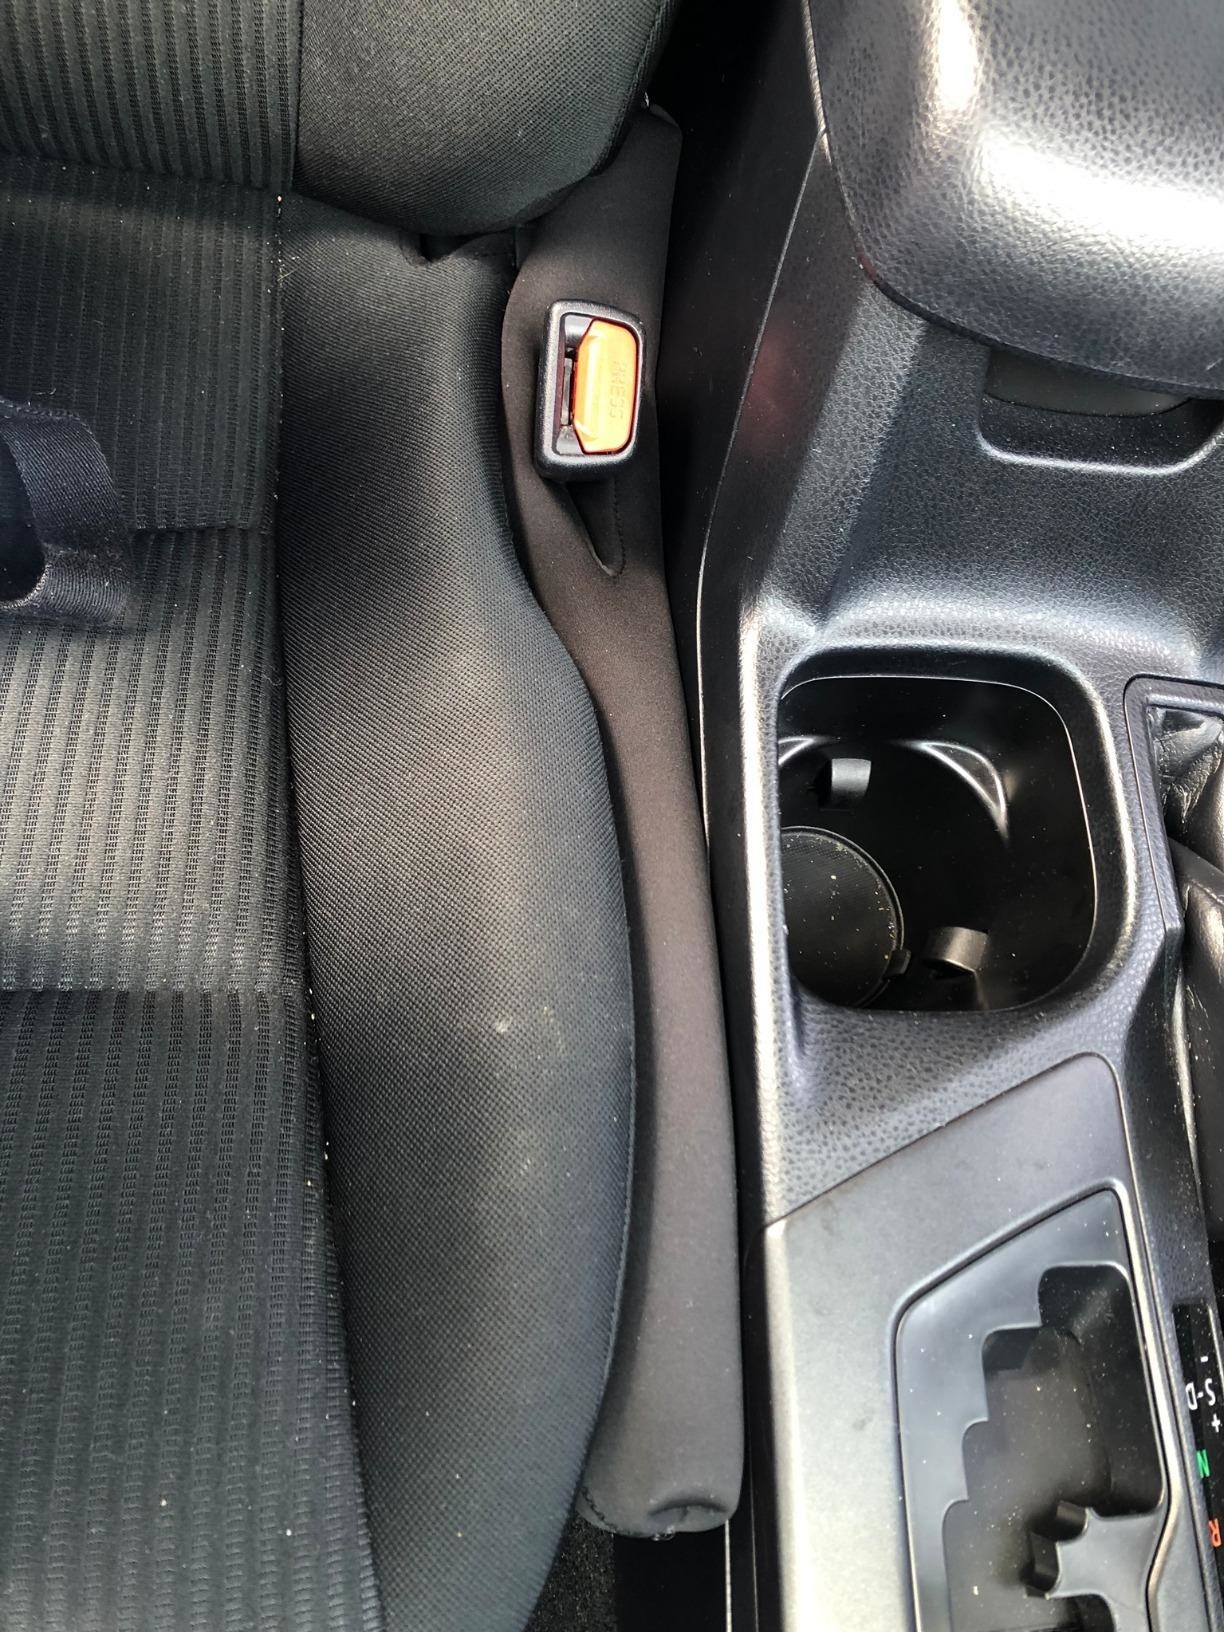 reviewer&#x27;s drop stop squished between their passenger seat and cup holder